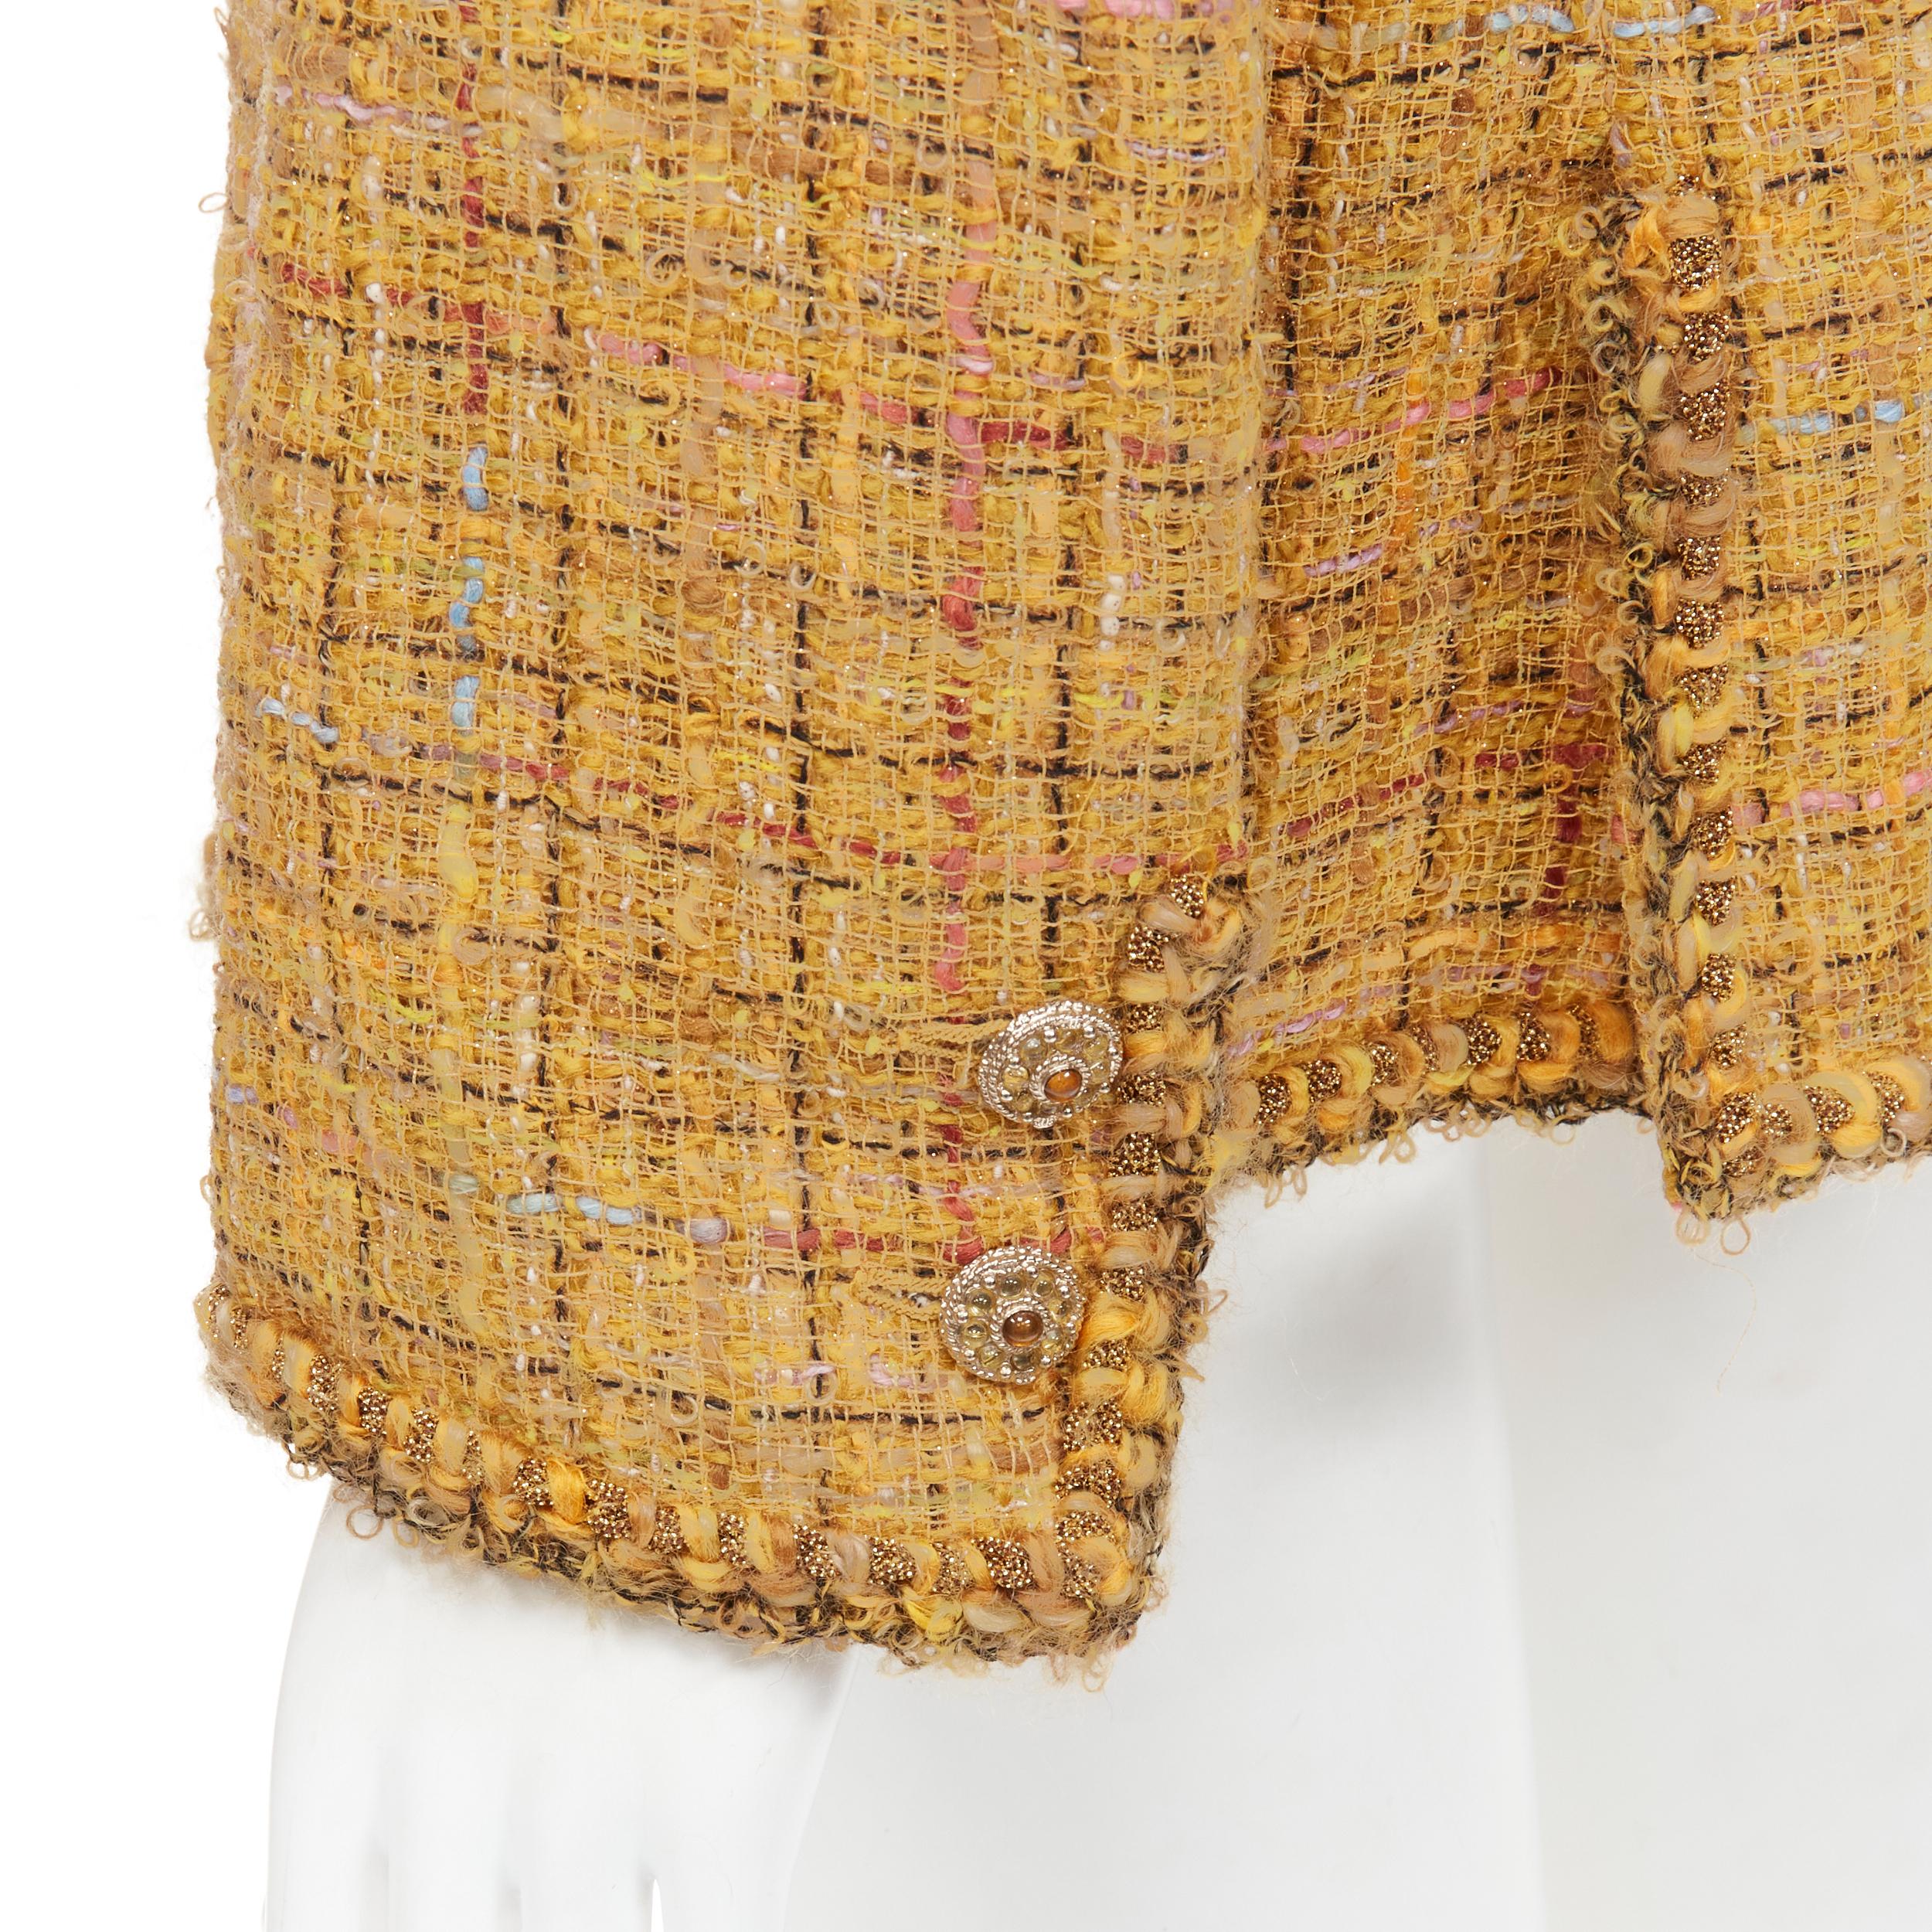 CHANEL 11C fold Fantasy Tweed braid trim 4-pocket blazer jacket FR42 L
Brand: Chanel
Designer: Karl Lagerfeld
Collection: 11C St Tropez 
Material: Wool
Color: Gold
Pattern: Solid
Closure: Button
Extra Detail: Fantasy Tweed in gold and multi pastel